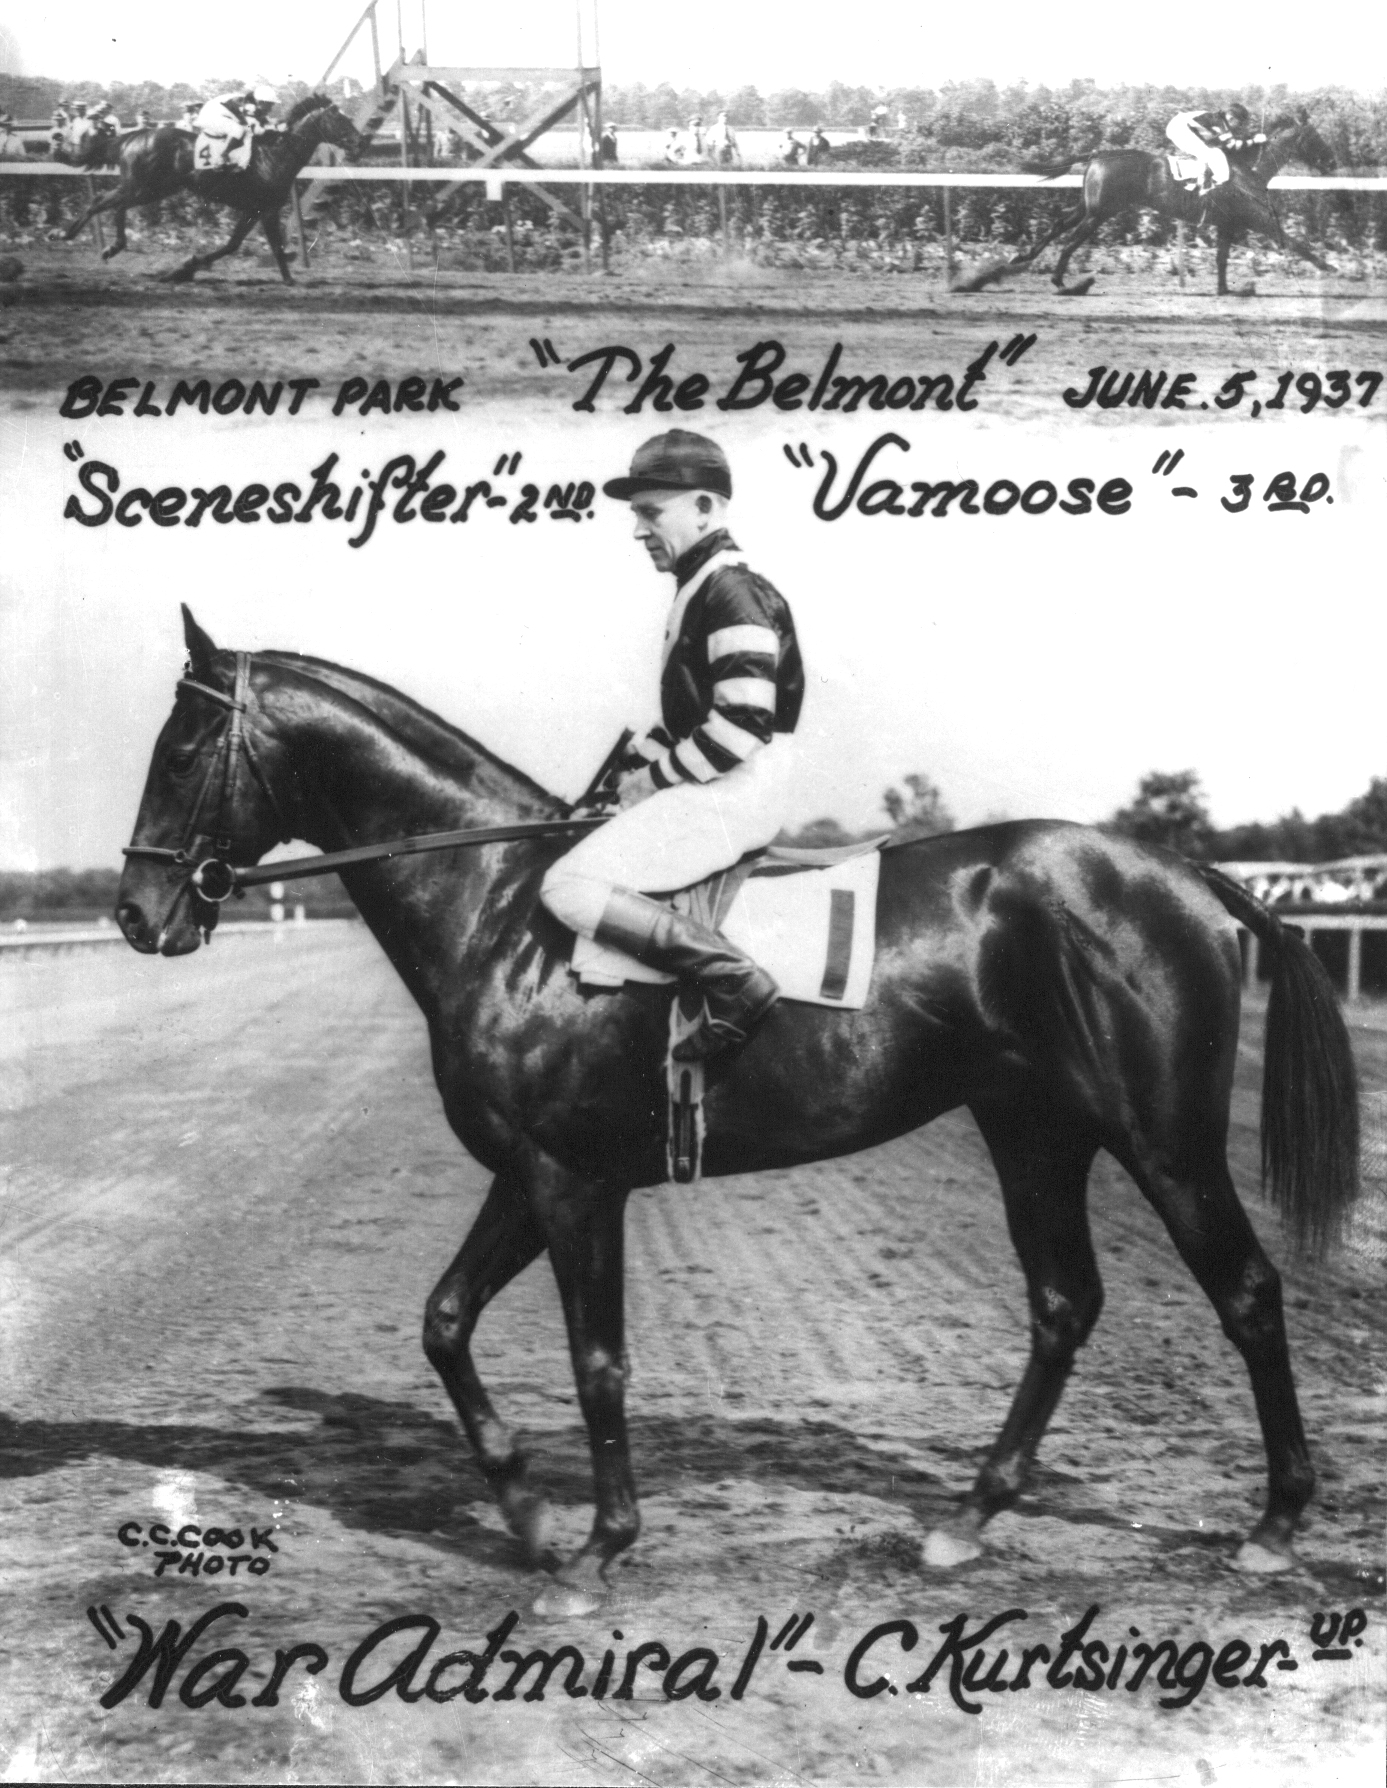 Keeneland Library Cook Collection - 5877 - 6.5.1937 War Admiral, C Kurtisnger up, at Belmont Stakes